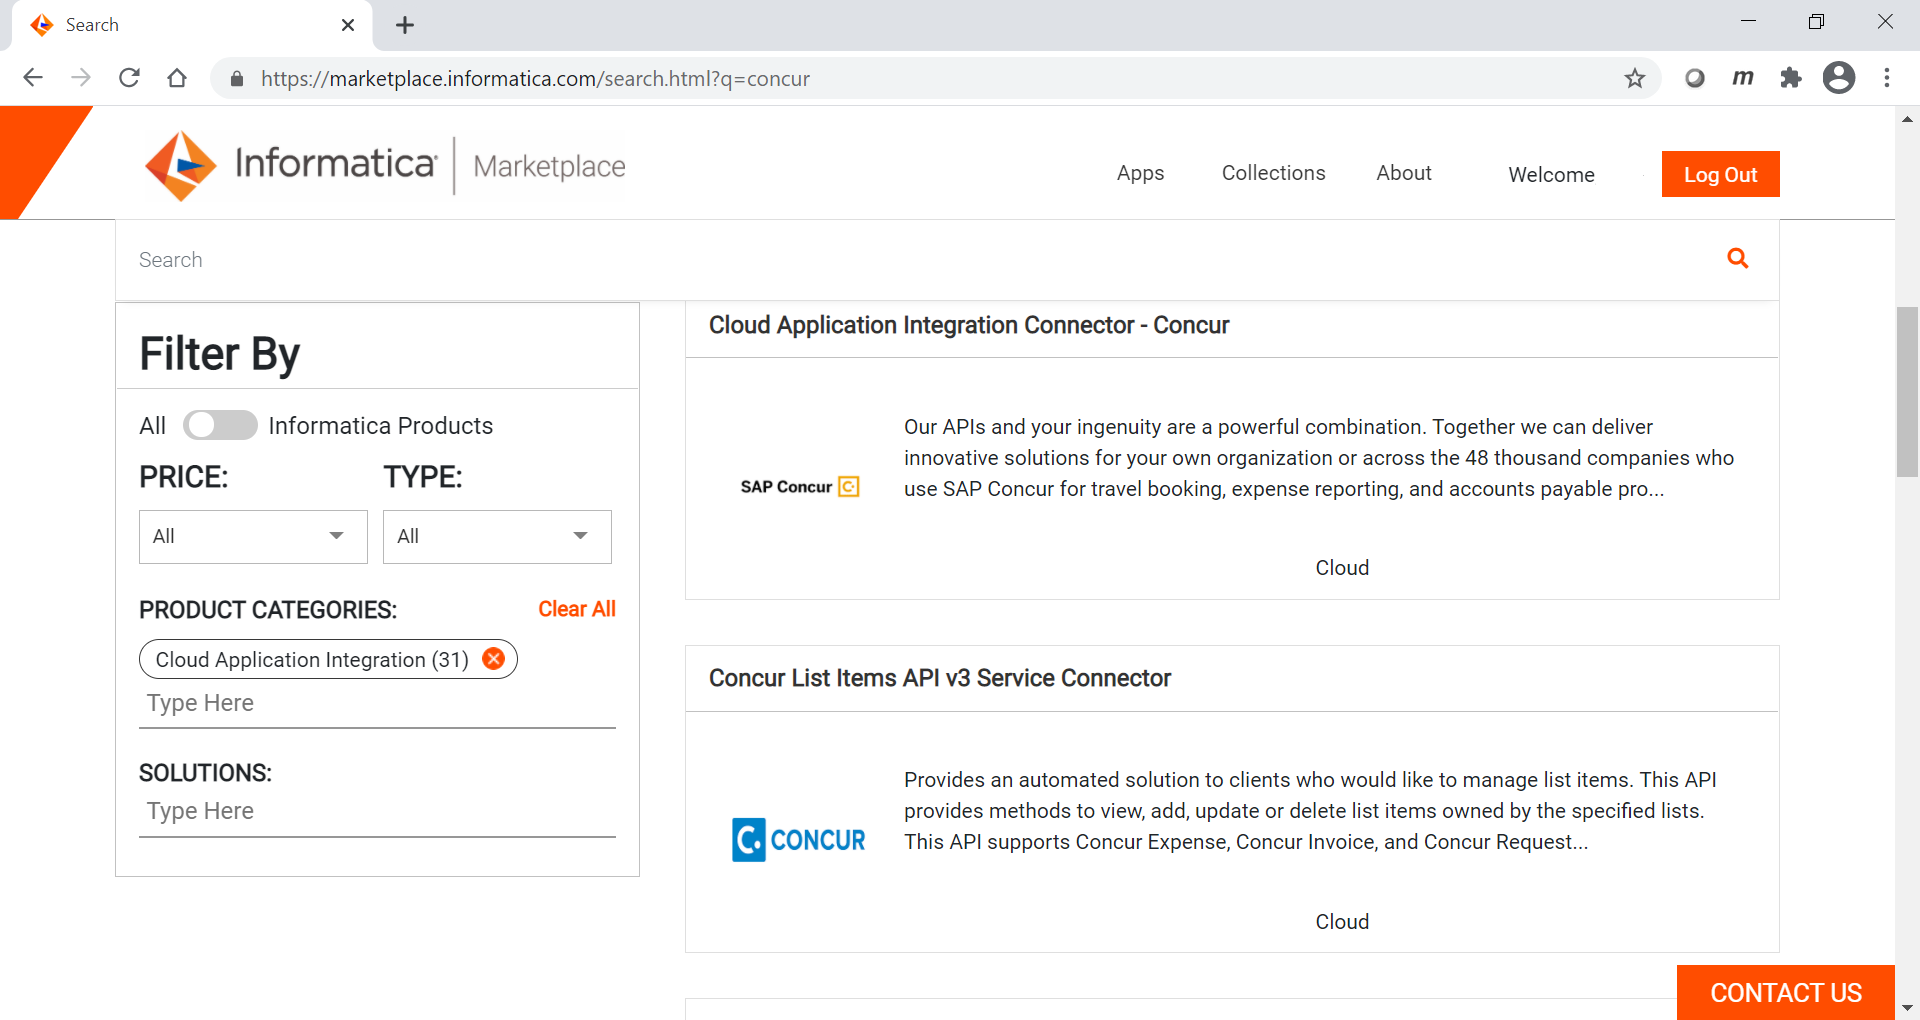 The image displays some sample Cloud Application Integration service connectors on Informatica Marketplace.